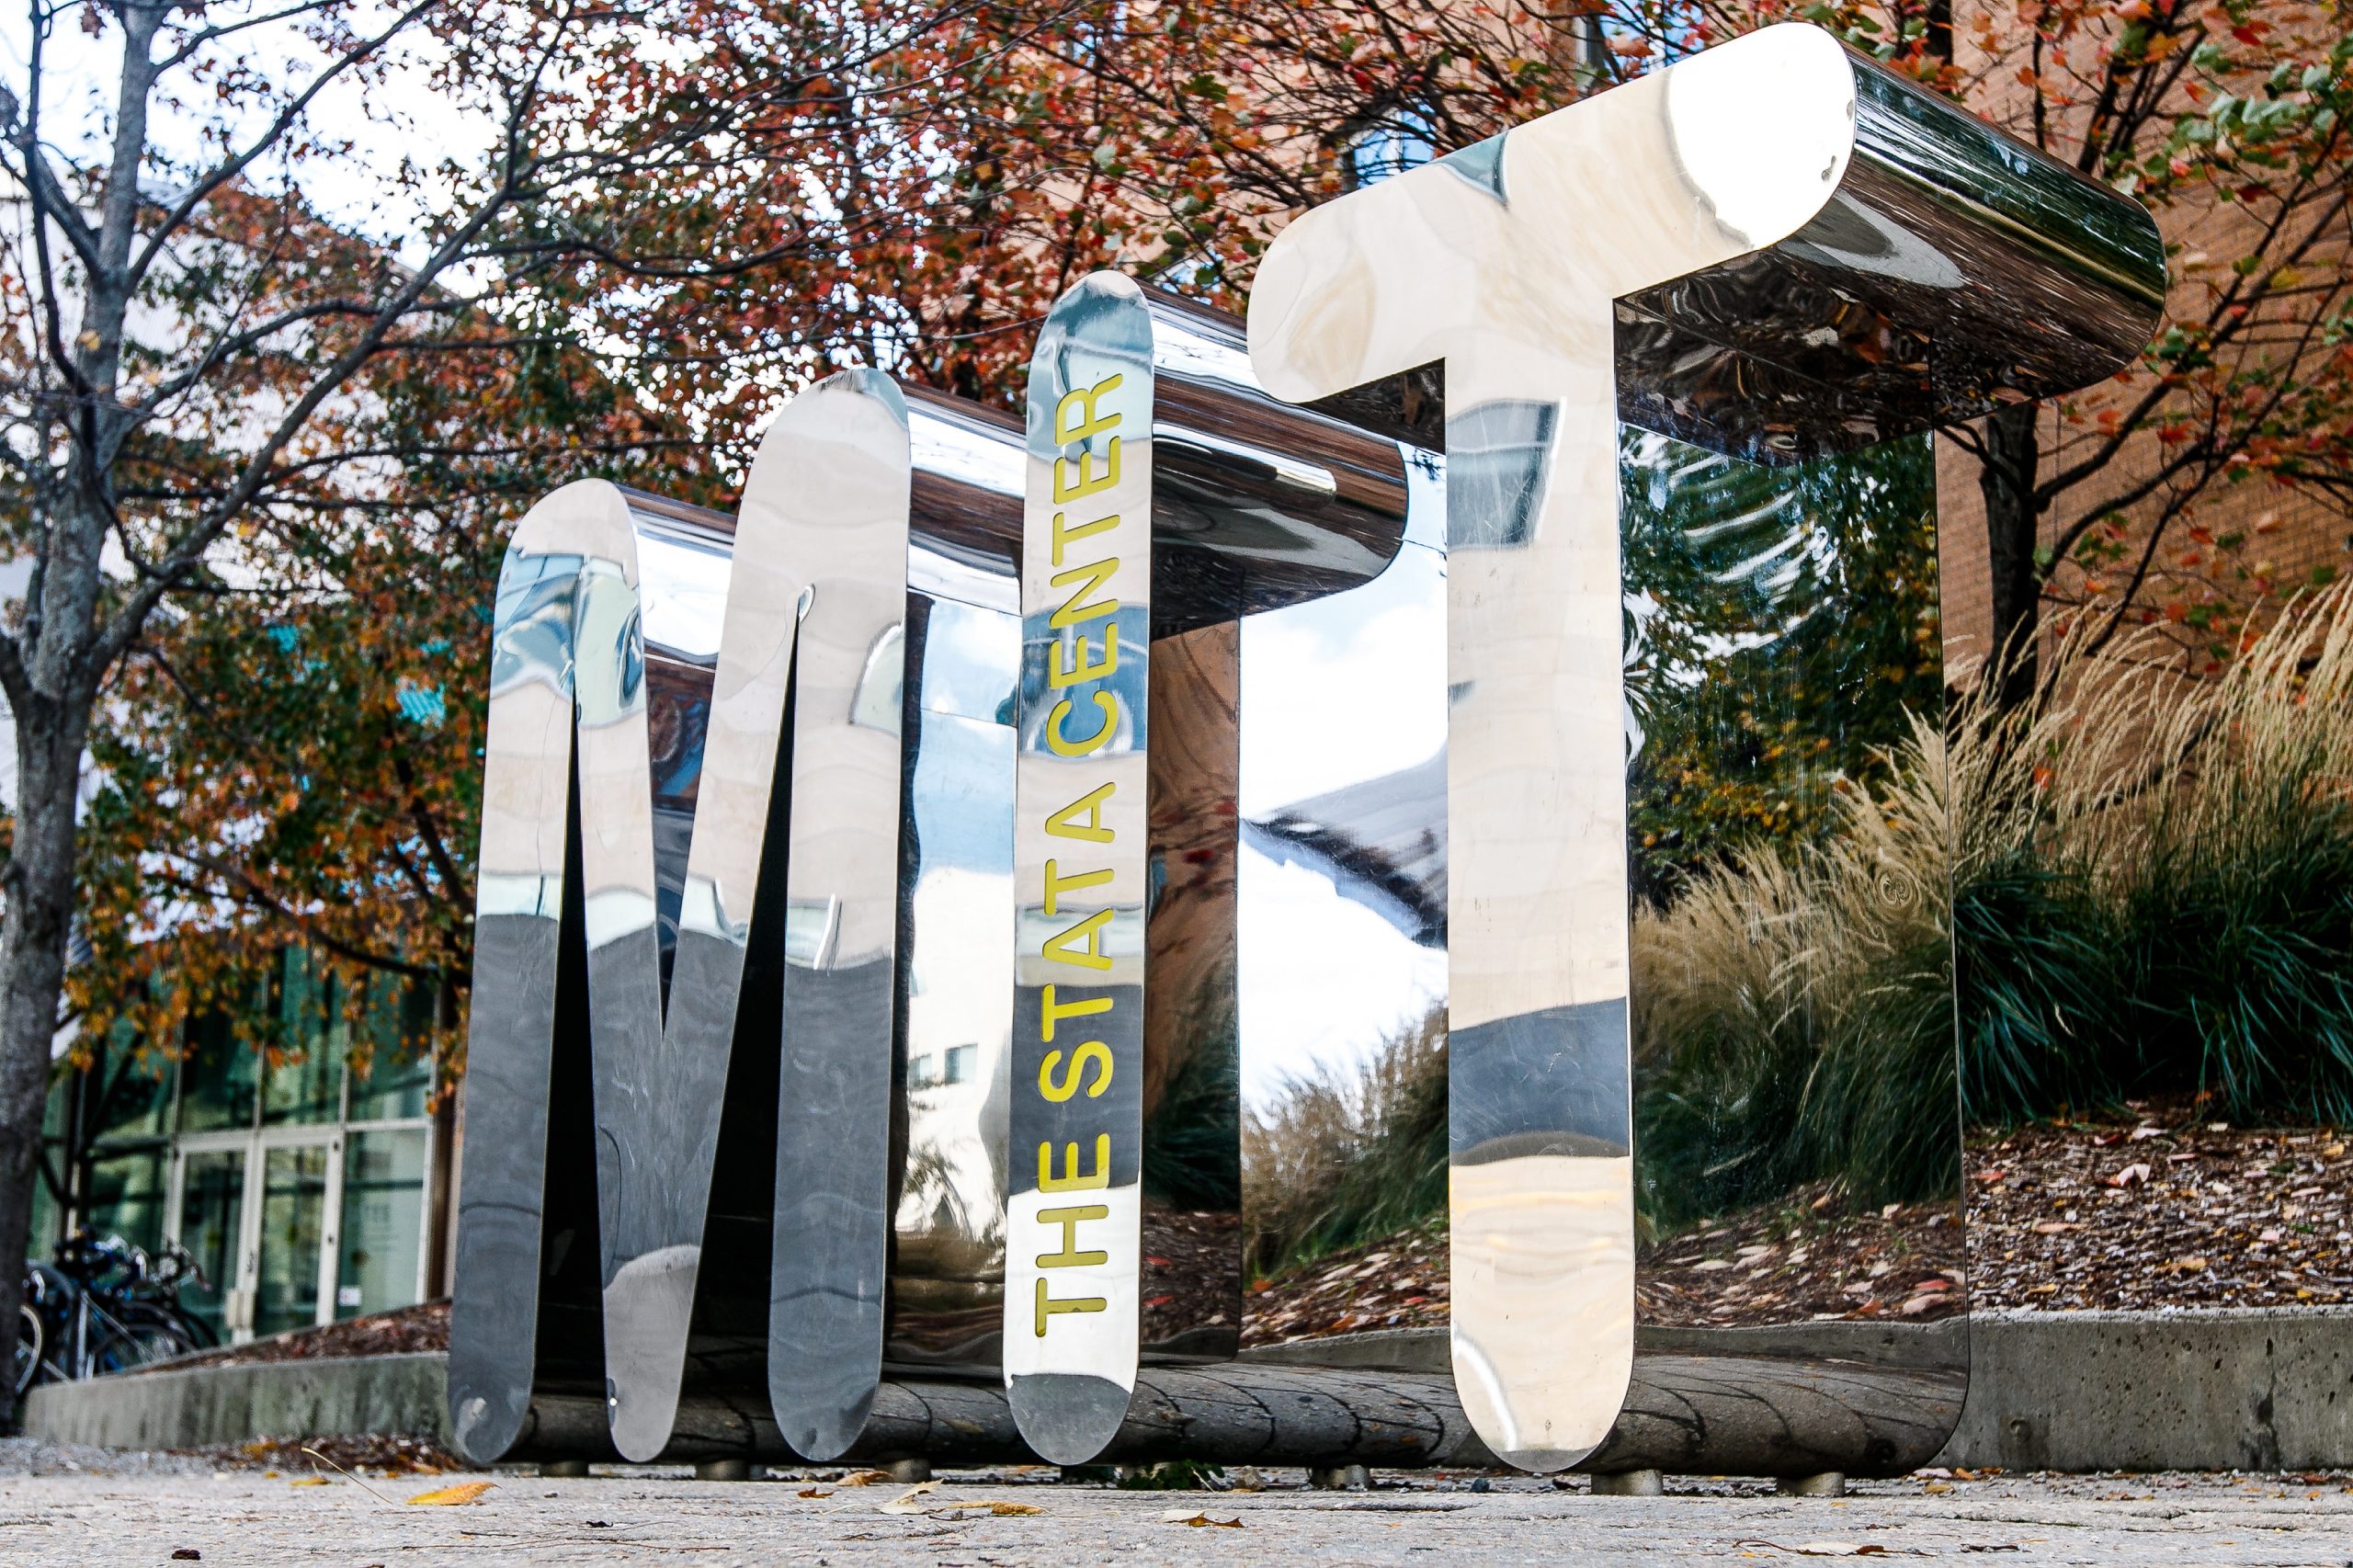 MIT, large metal letters, installed in the middle of the Stata C